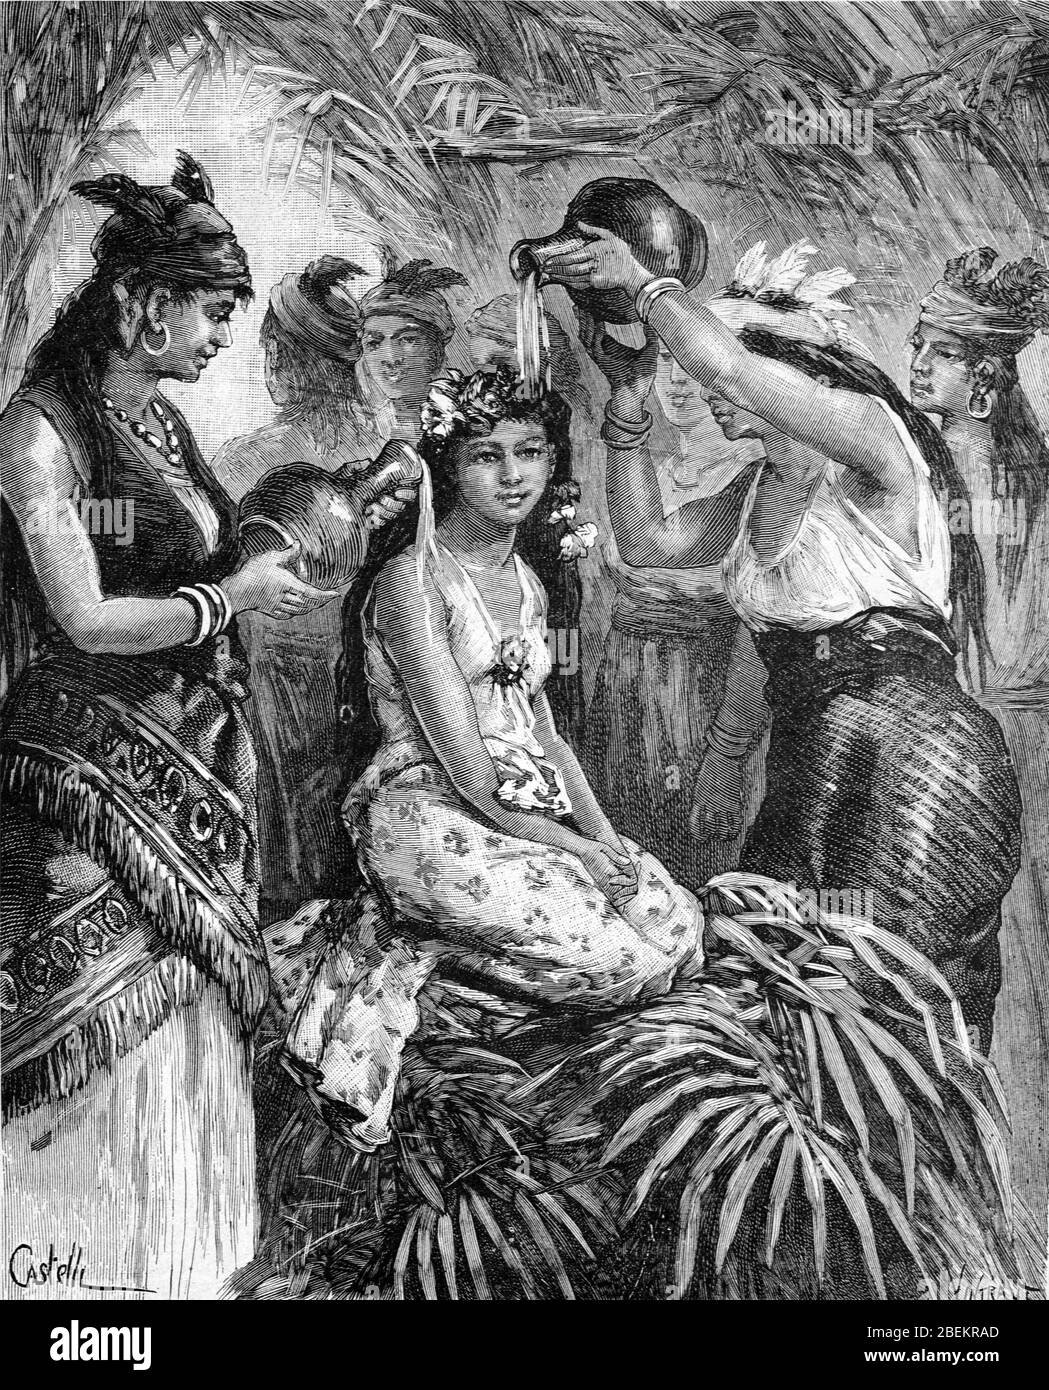 Young Native Bride being Prepared for Marriage, Wedding and Bridal Ceremony among Indians, Amerindians, Indigenous People or Native Americans of Panama Central America. Vintage or Old Illustration or Engraving 1887 Stock Photo